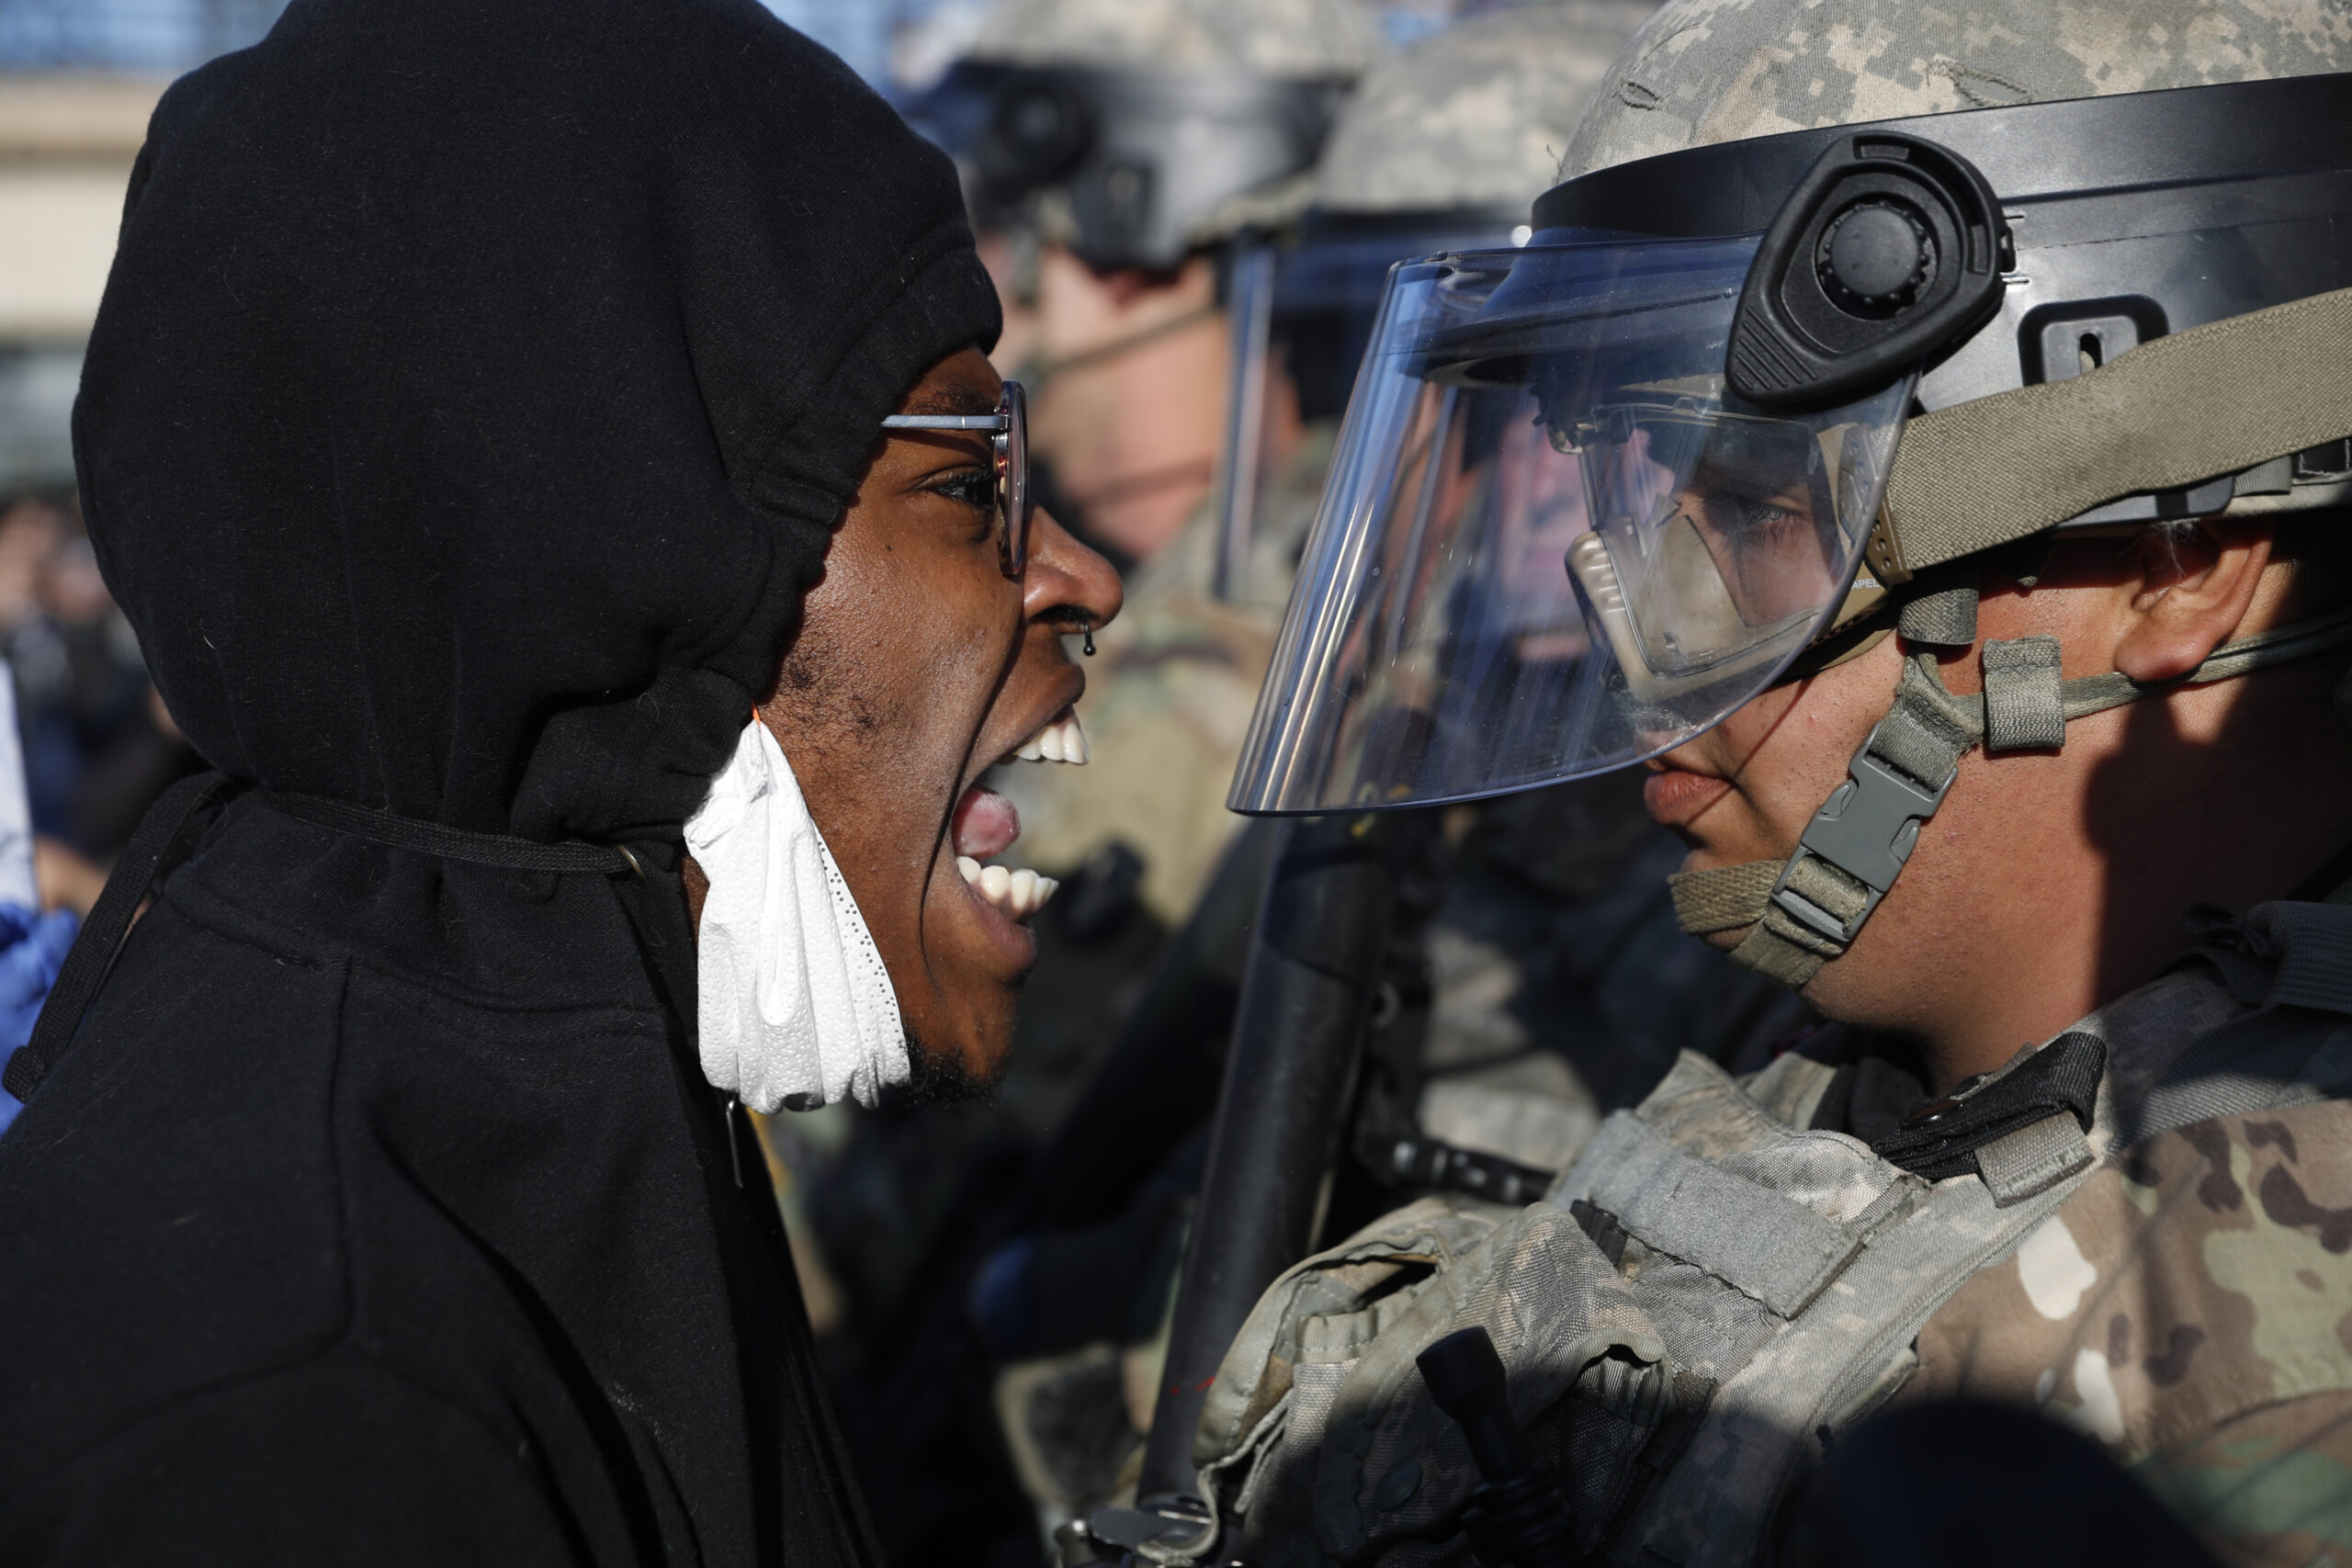 A protester yells at a member of the Minnesota National Guard in Minneapolis